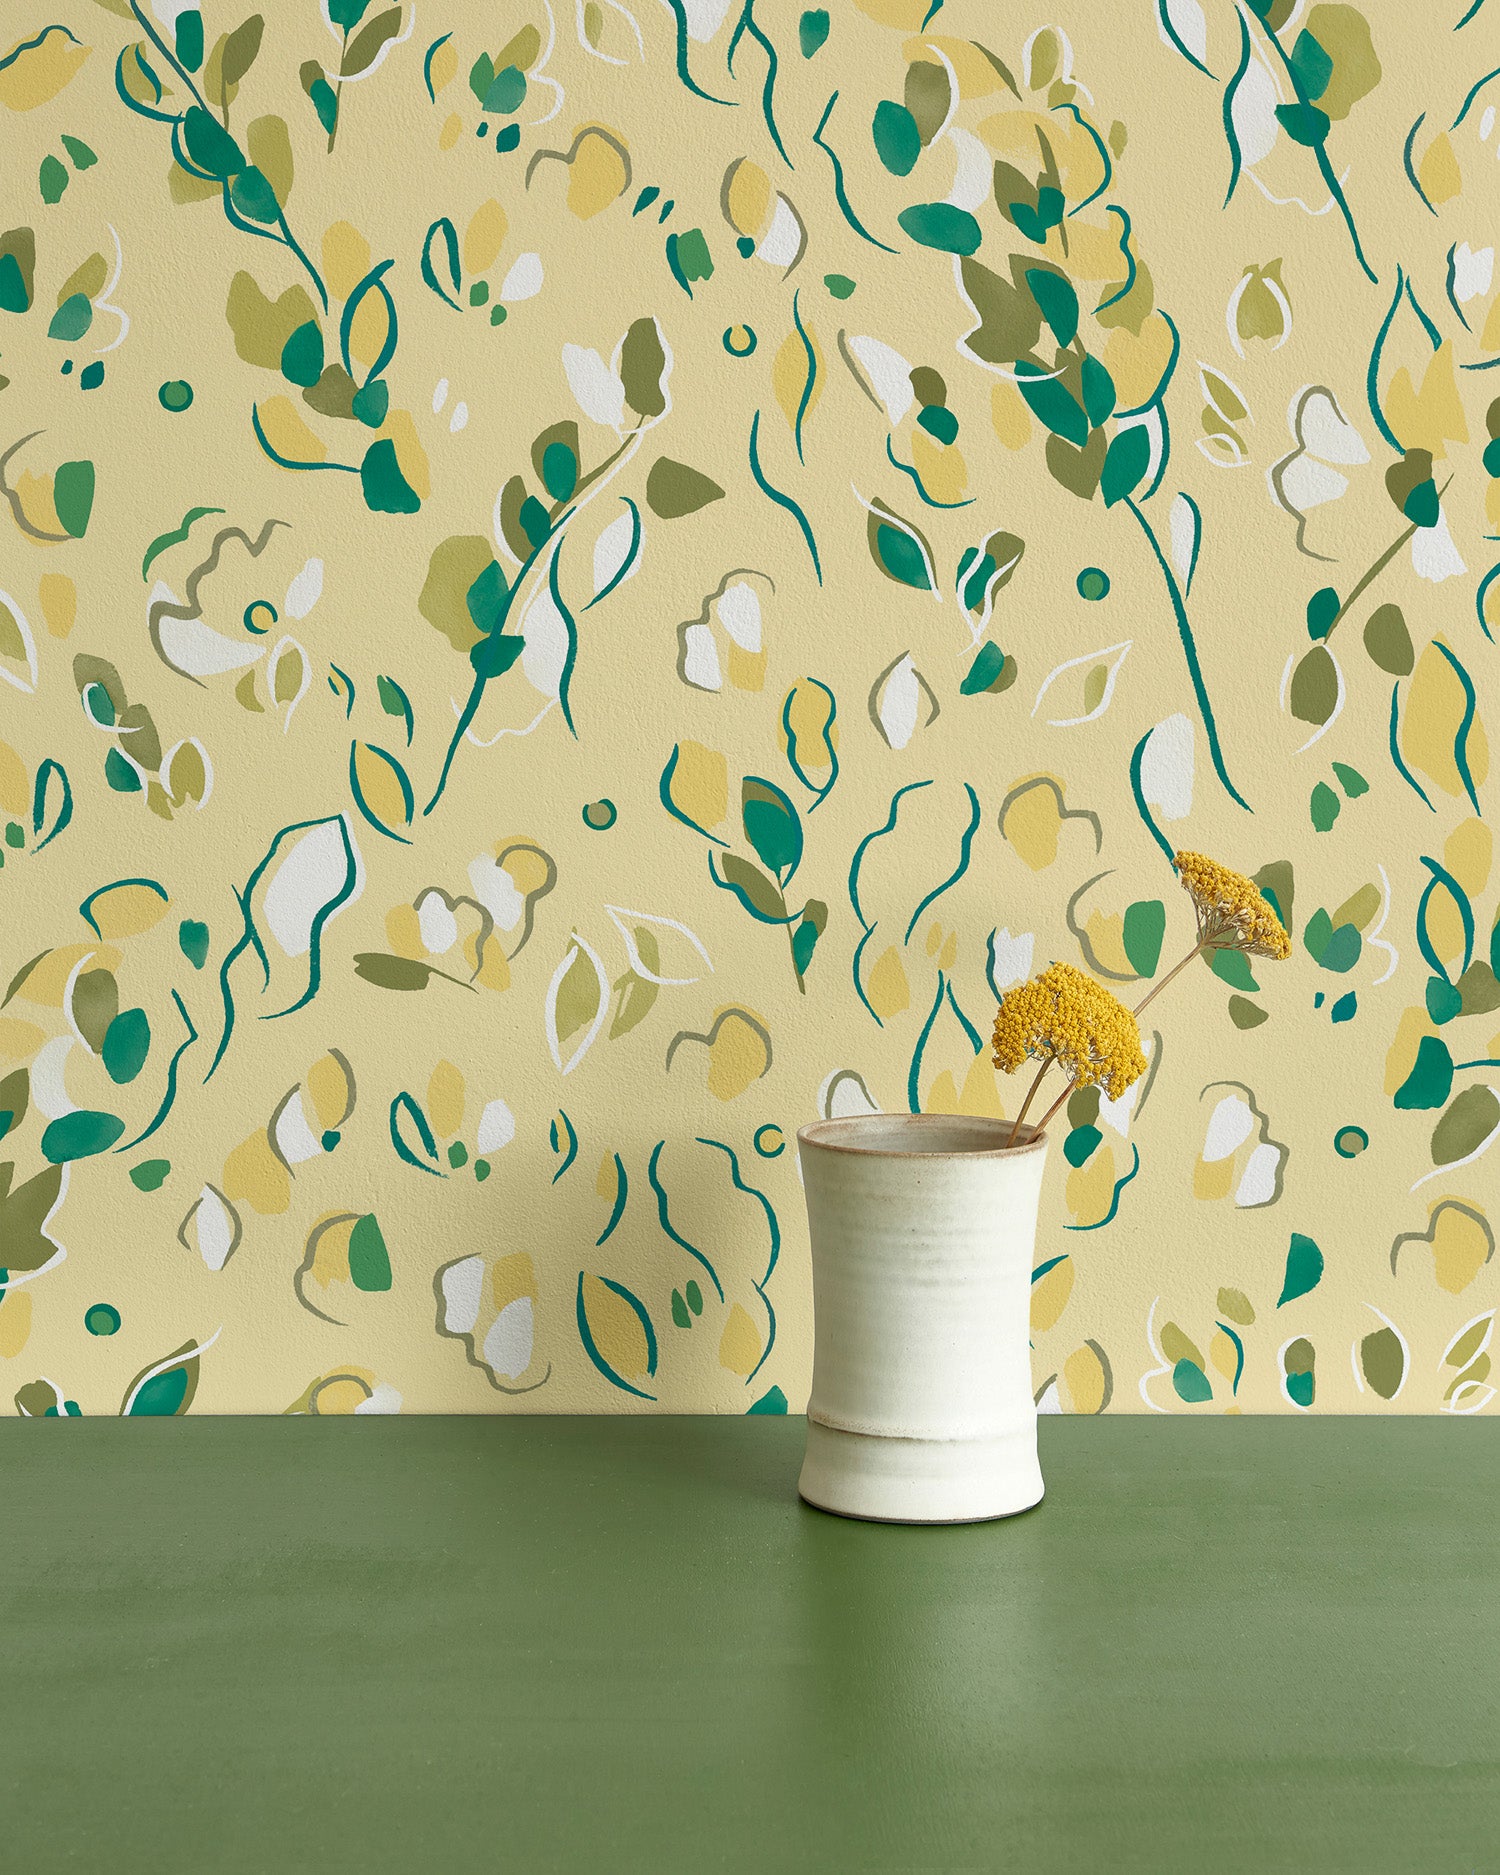 Vase of flowers stands in front of a wall papered in a painterly leaf print in shades of green, white and yellow.